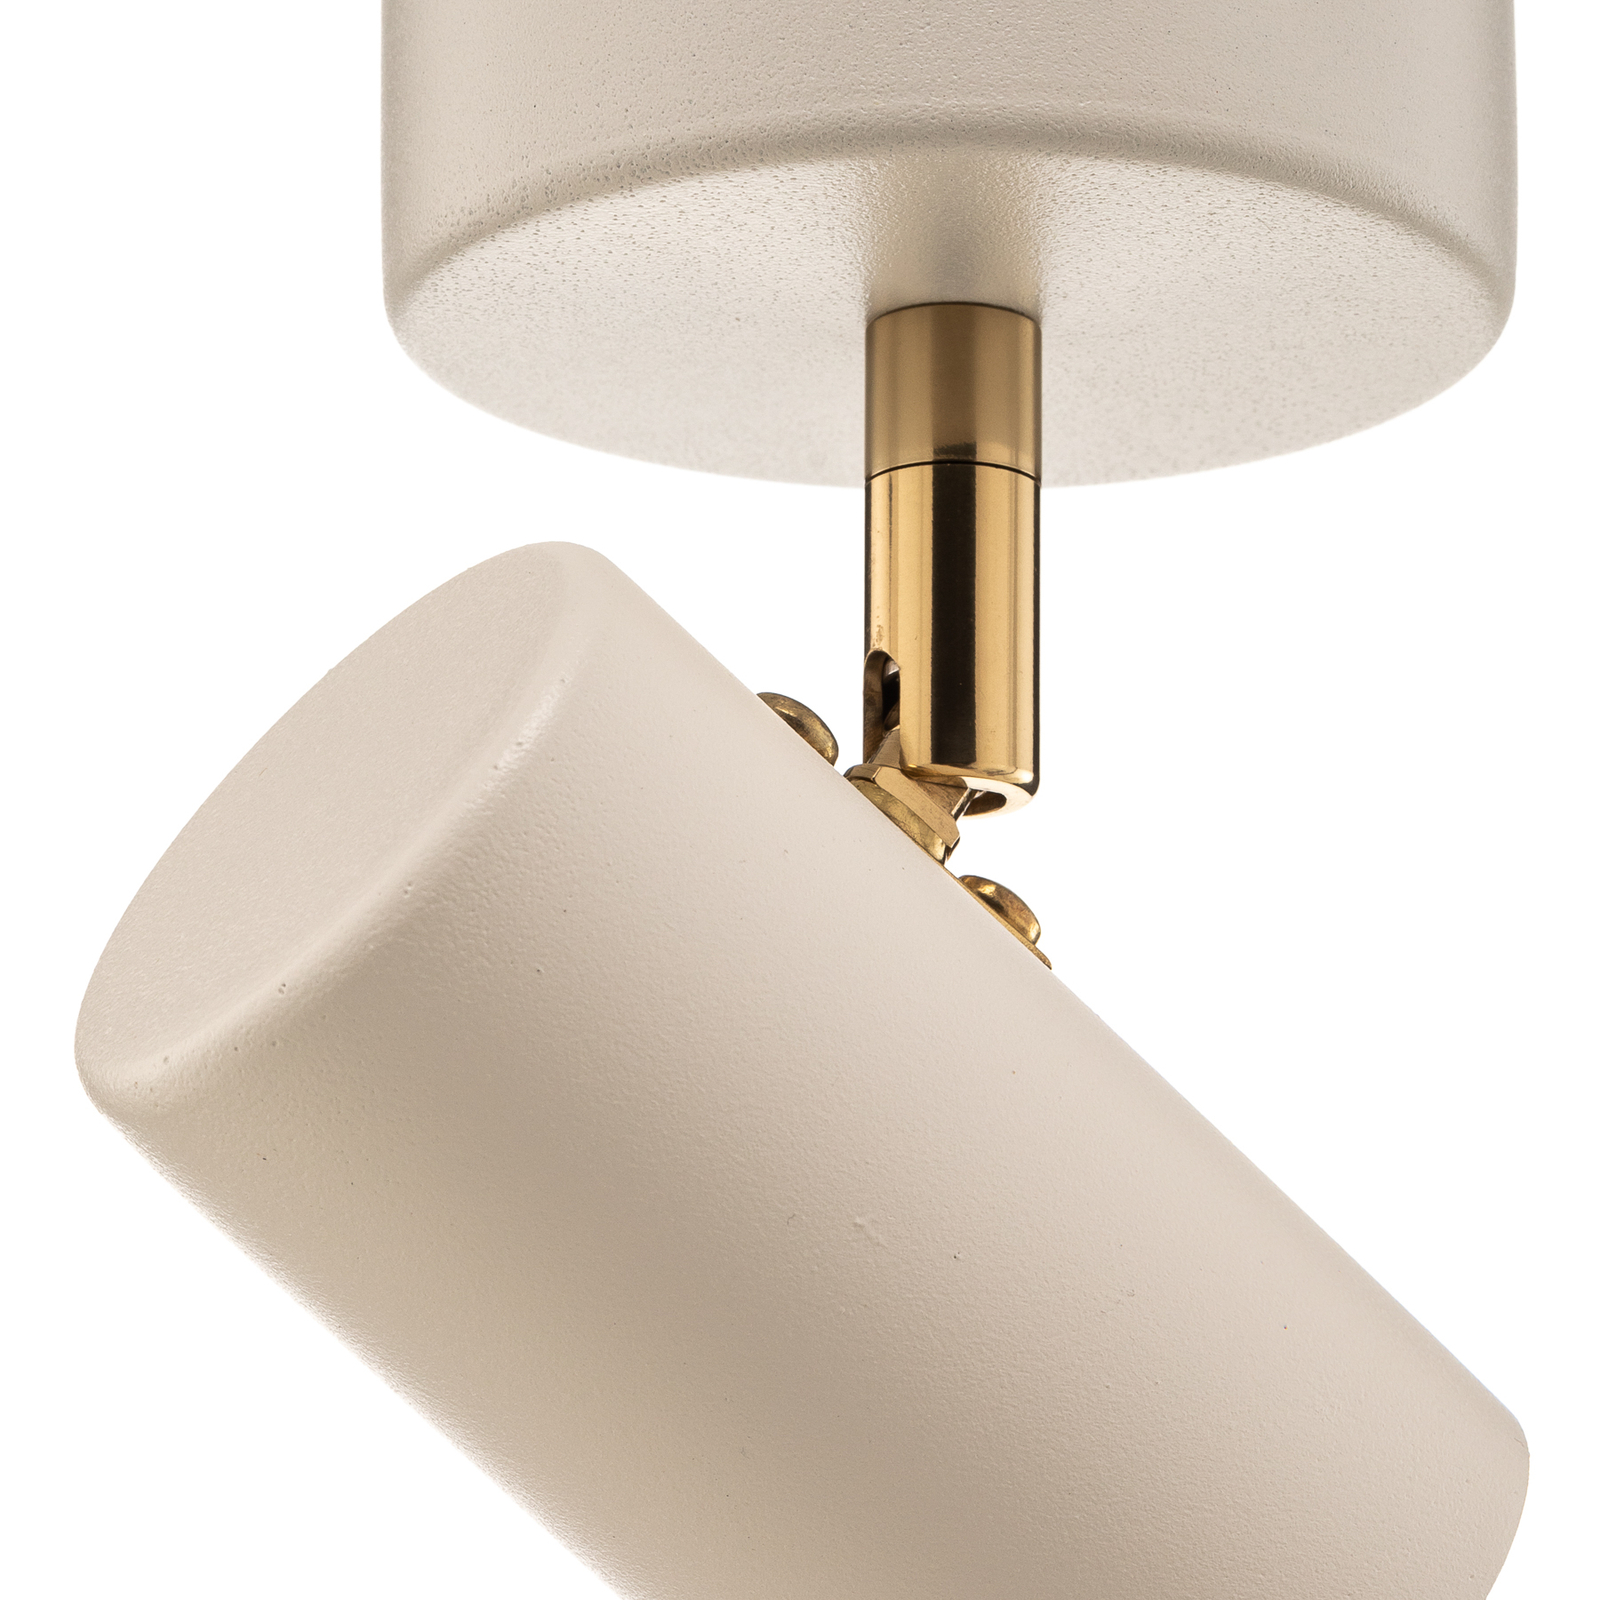 Lund downlight in white, one-bulb